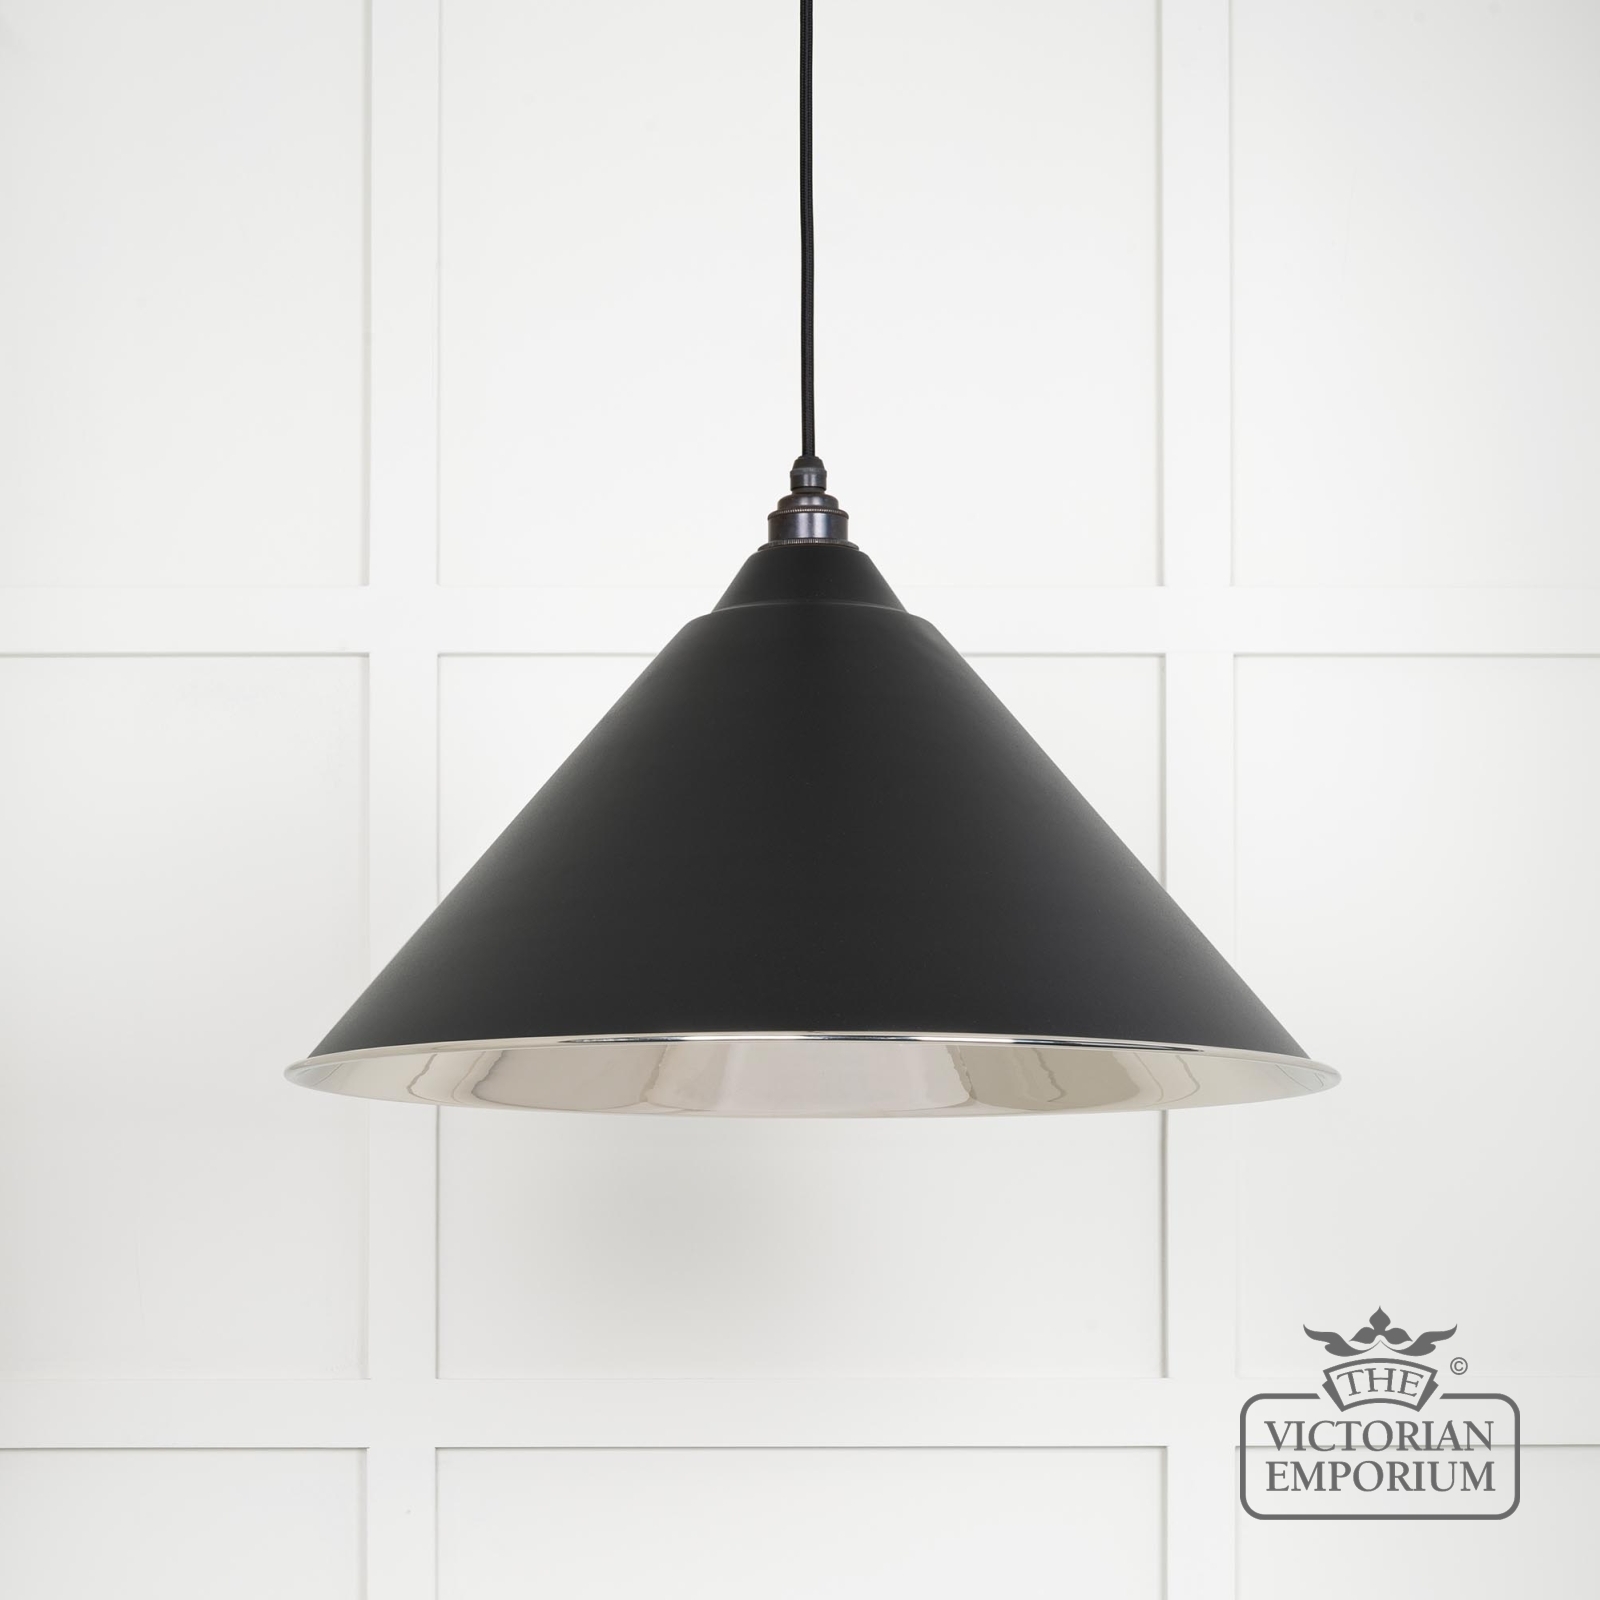 Hockliffe pendant light in smooth nickel and Black exterior